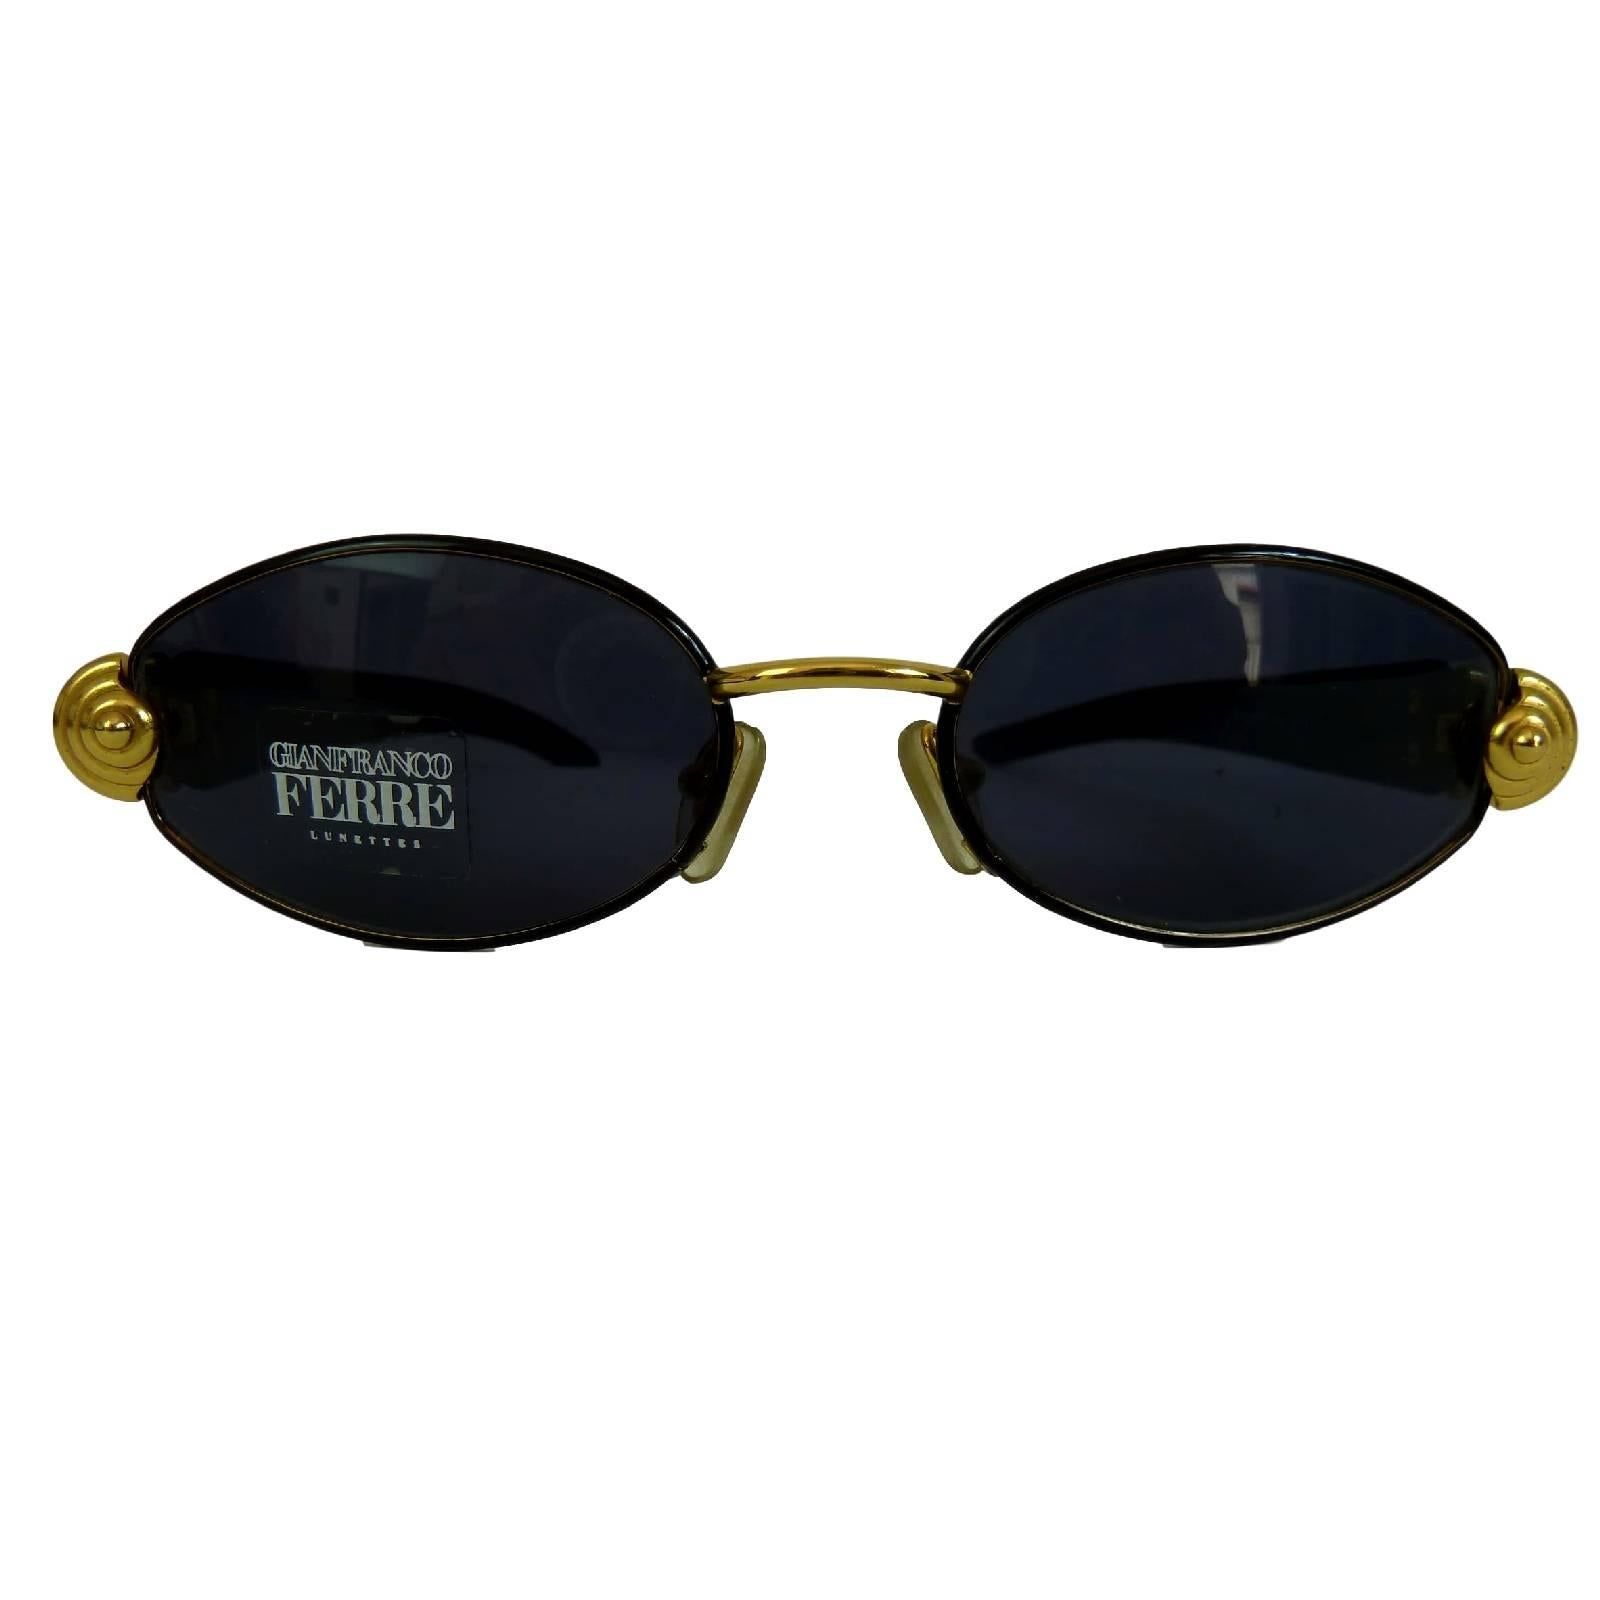 Gianfranco Ferre vintage sunglasses GFF 270/S bone and metal gold 1980s black shape. Made in italy rare model shell with old hardware. Bone material.

Eye size: 52 mm
Bridge: 19 mm
Temple Lenght: 140 mm

Material: Bone
Color: Black
Model: GSS 270/S